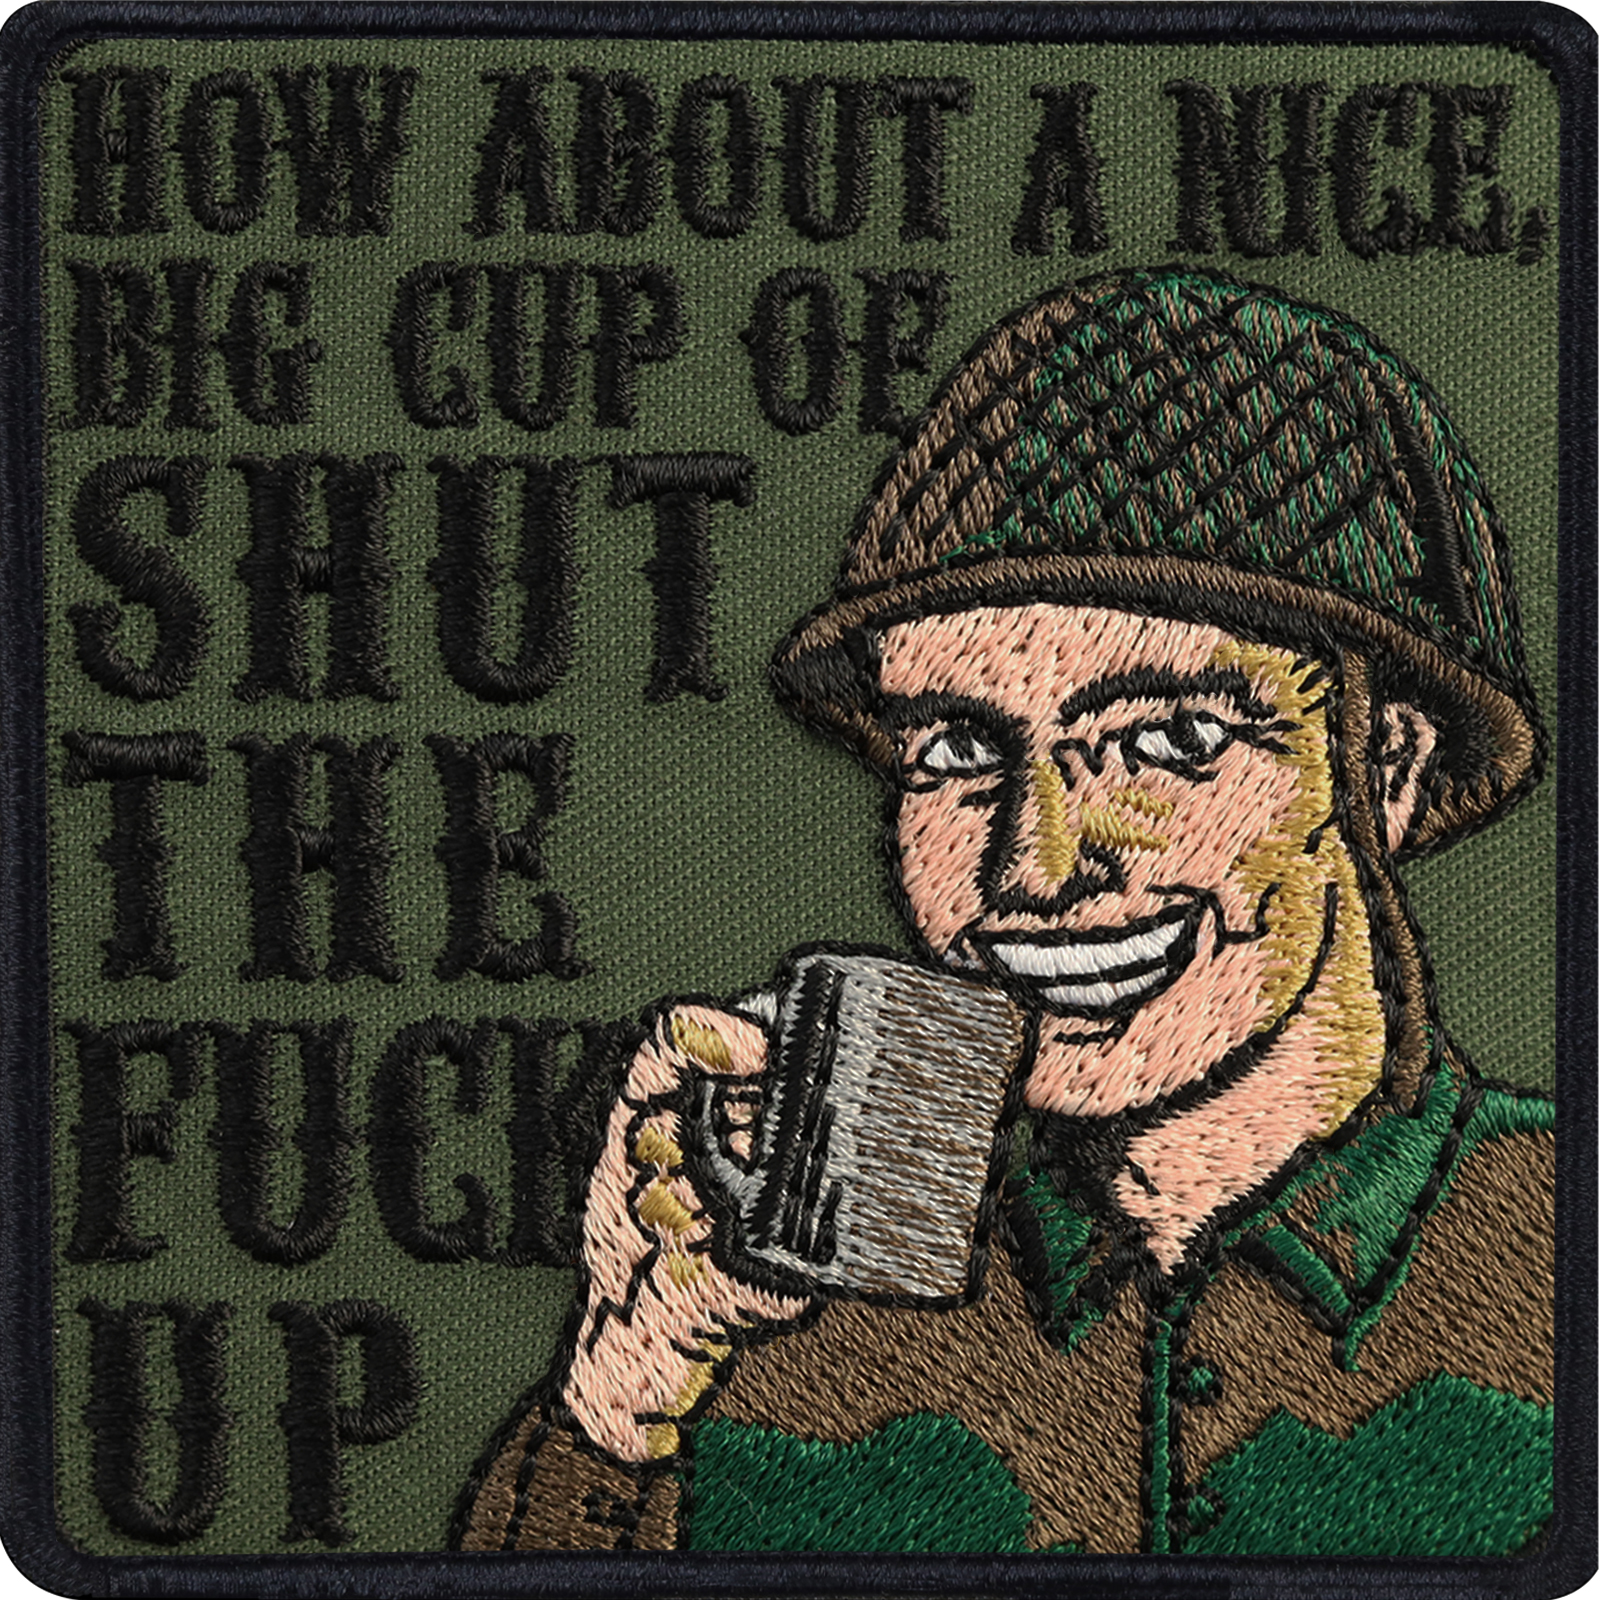 How about a nice, big cup of shut the fuck up - Patch